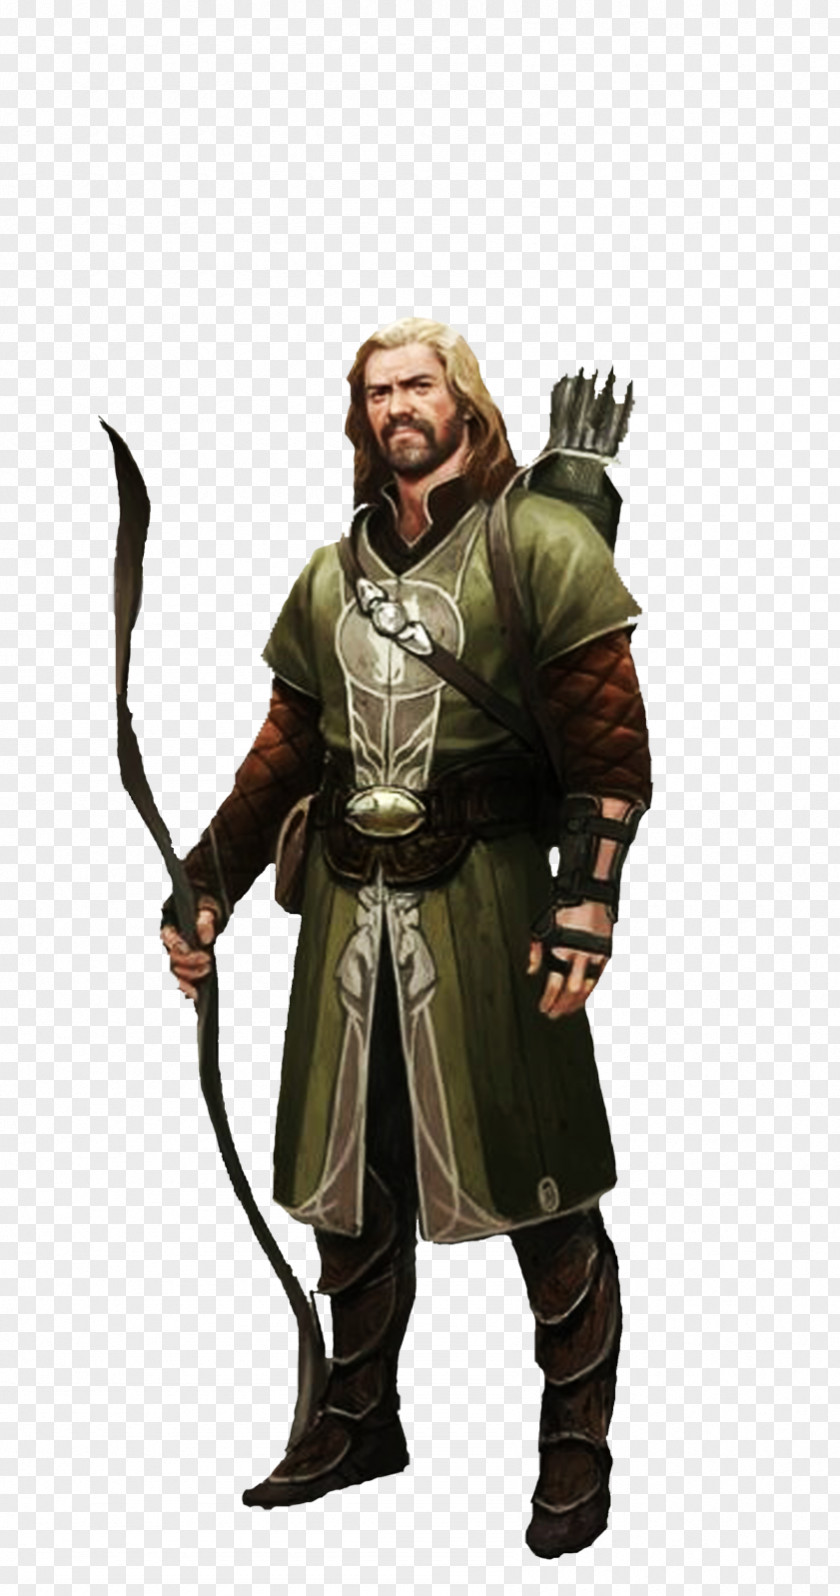 Fantasy City Dungeons & Dragons Pathfinder Roleplaying Game Concept Art Ranger PNG